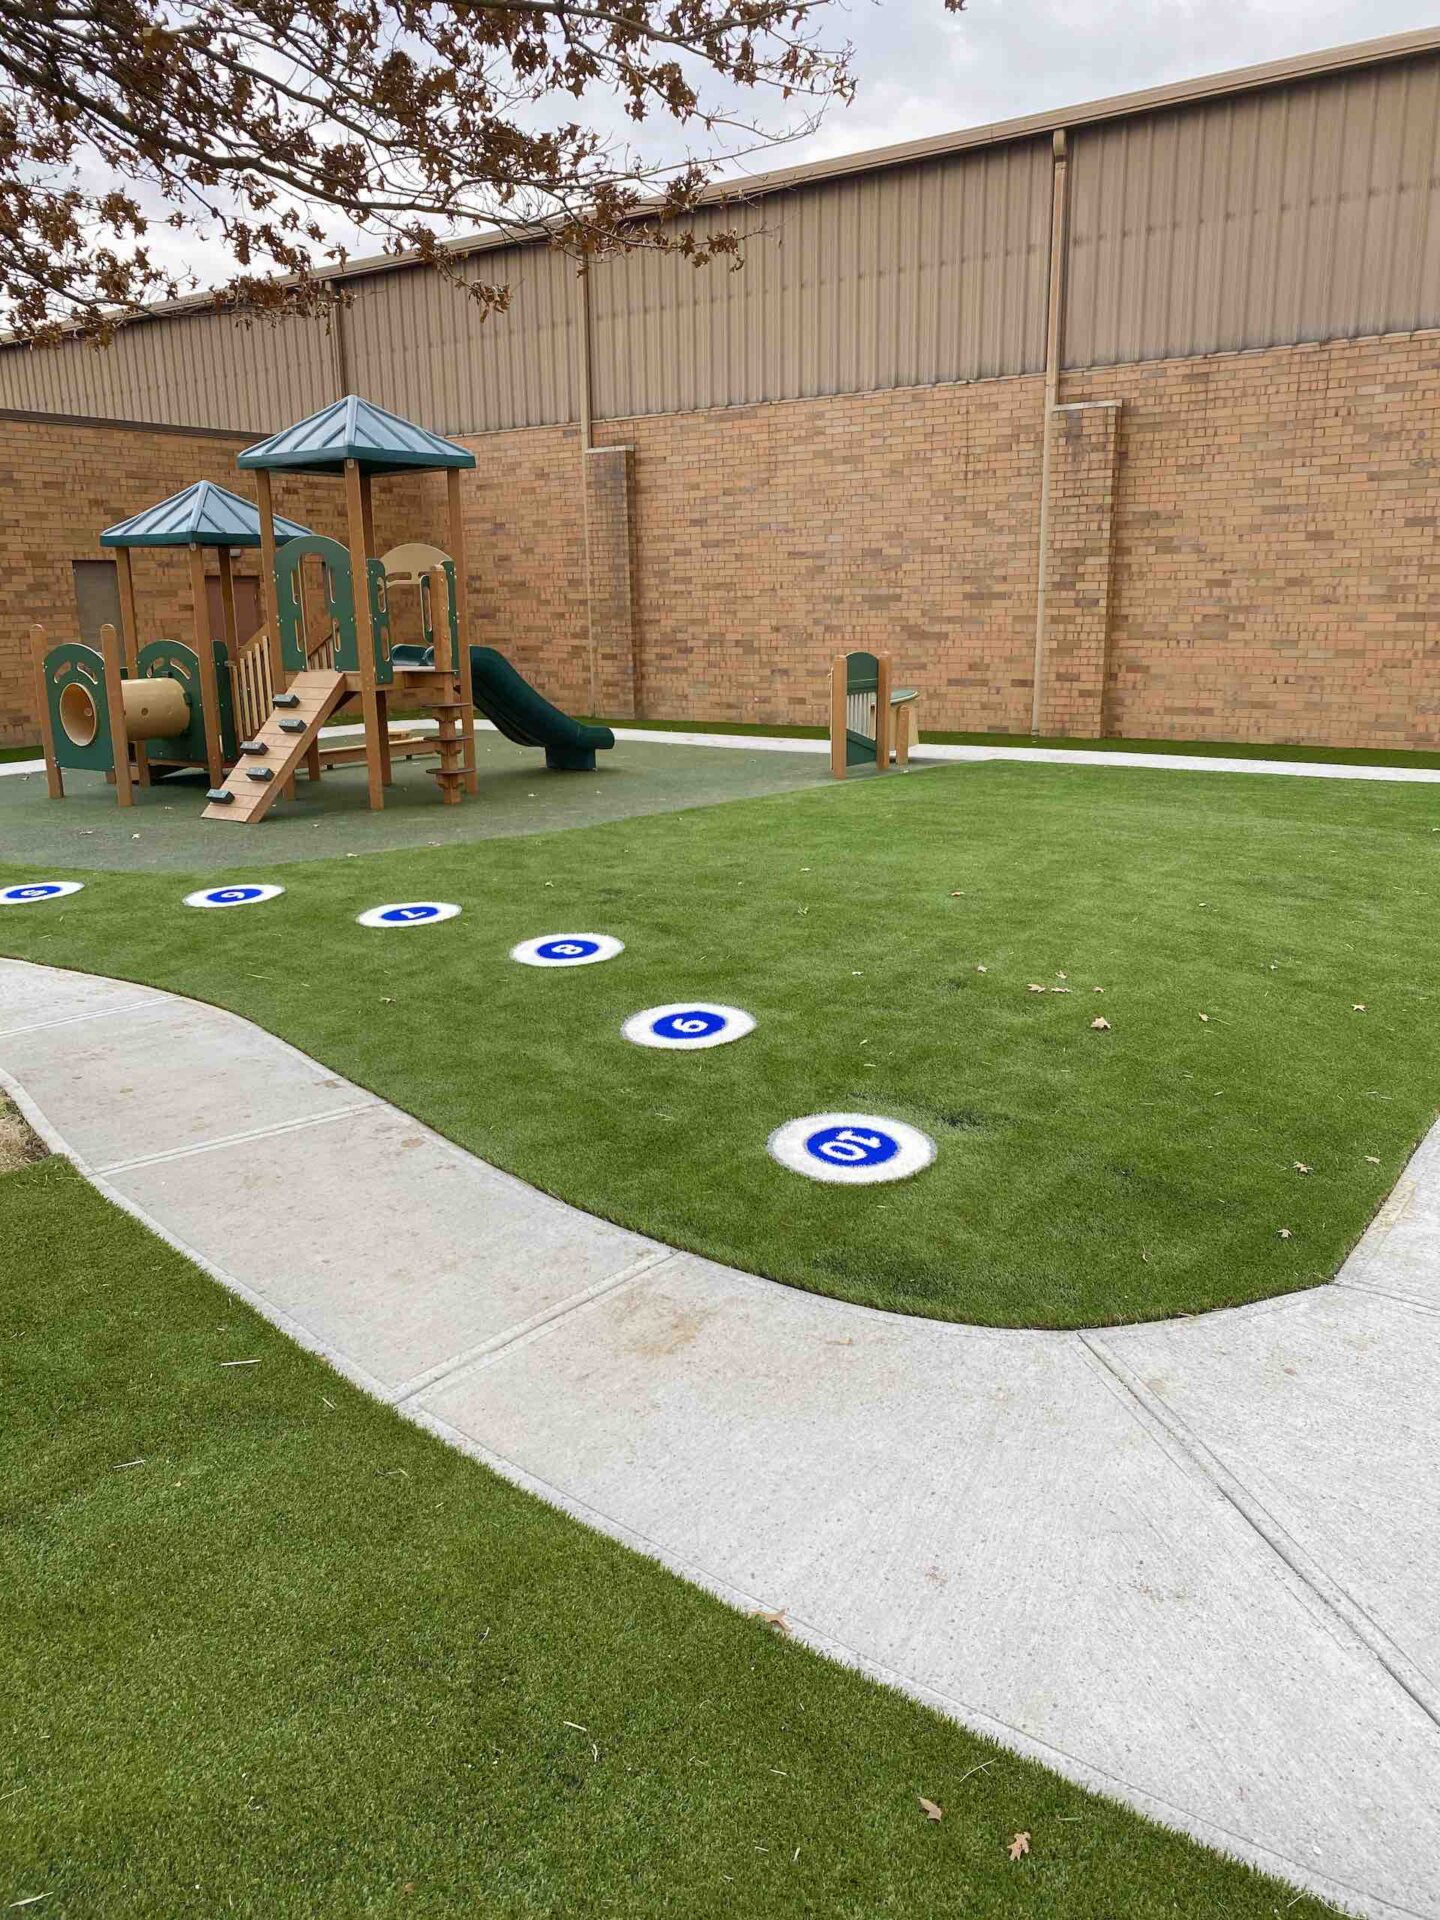 A playground with artificial grass features a slide structure, number-marked stepping stones, and a winding concrete path against a brick wall backdrop.